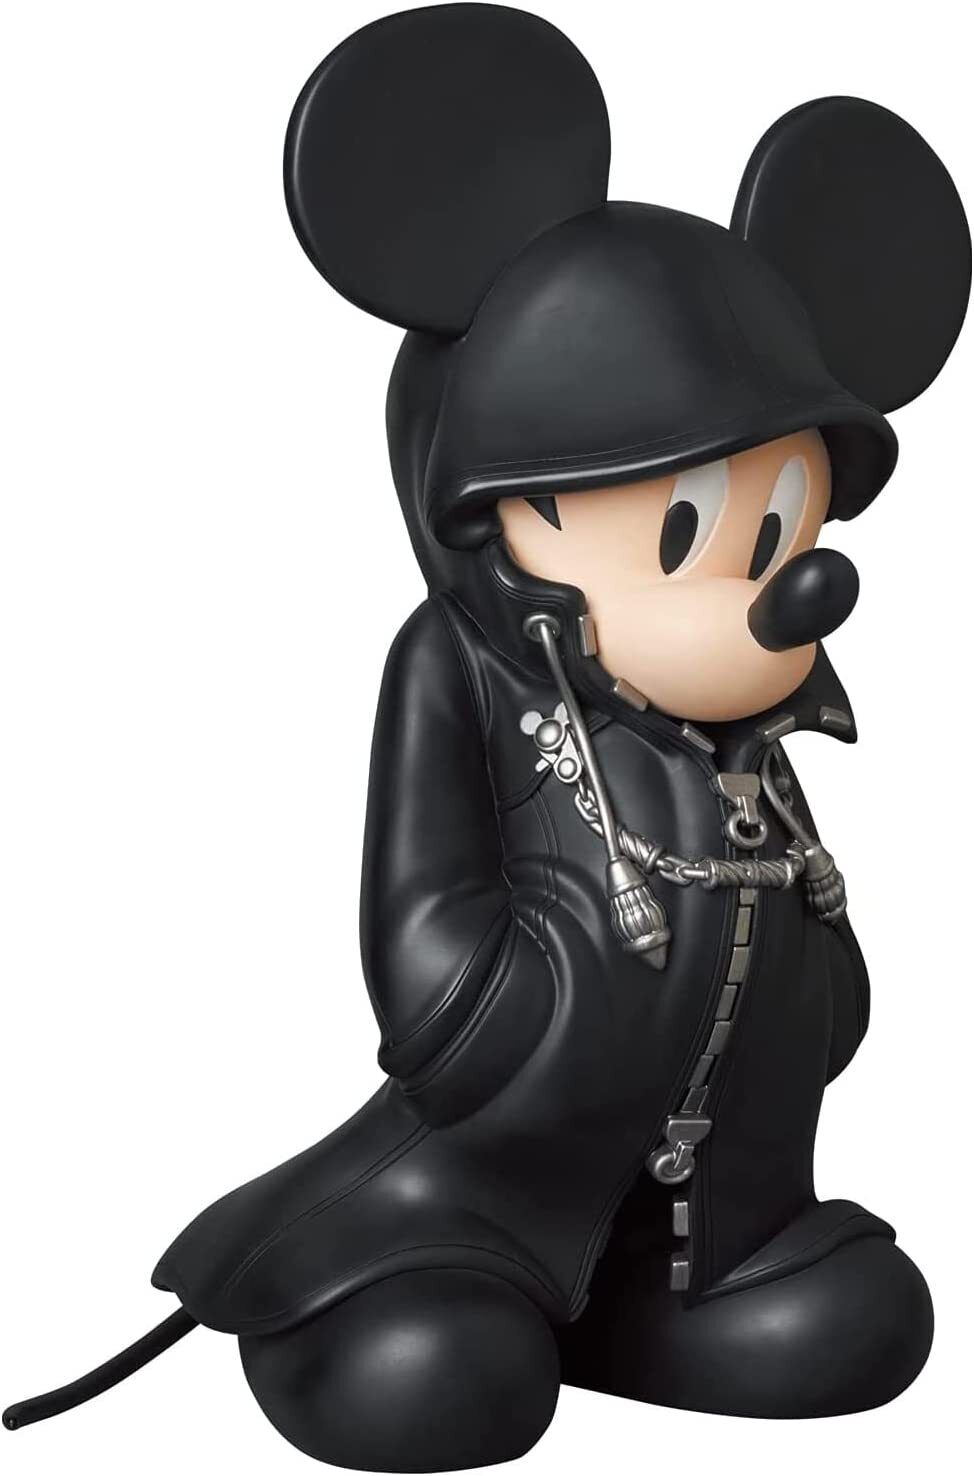 MEDICOM TOY KING MICKEY STATUE 350mm Figure With Tracking NEW From Japan